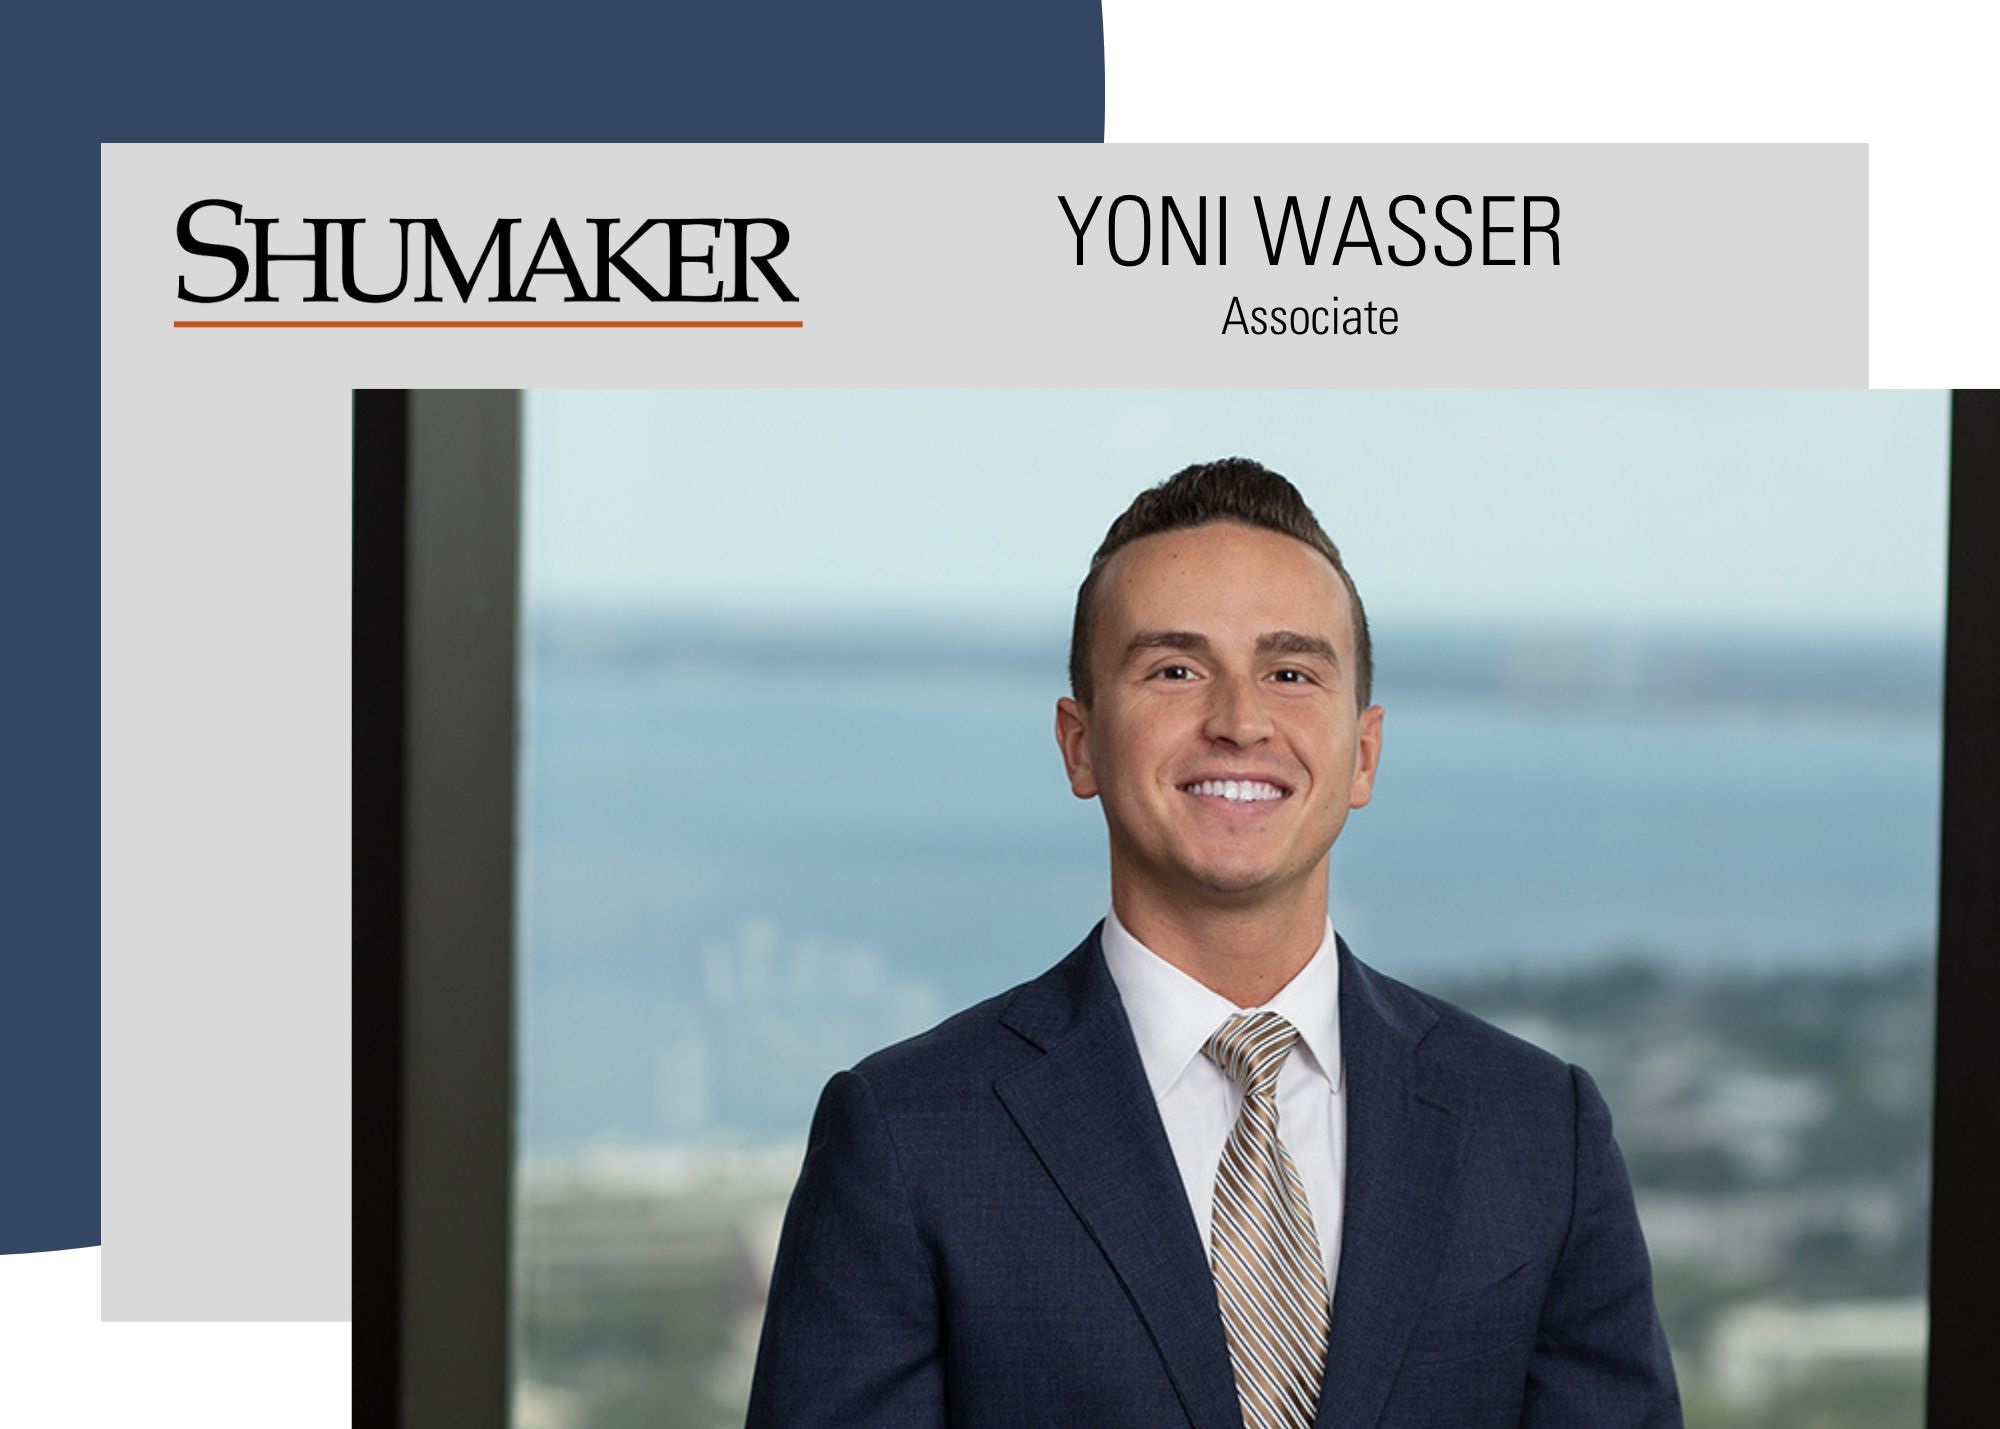 Shumaker Expands Community Associations Practice with Addition of Yoni Wasser